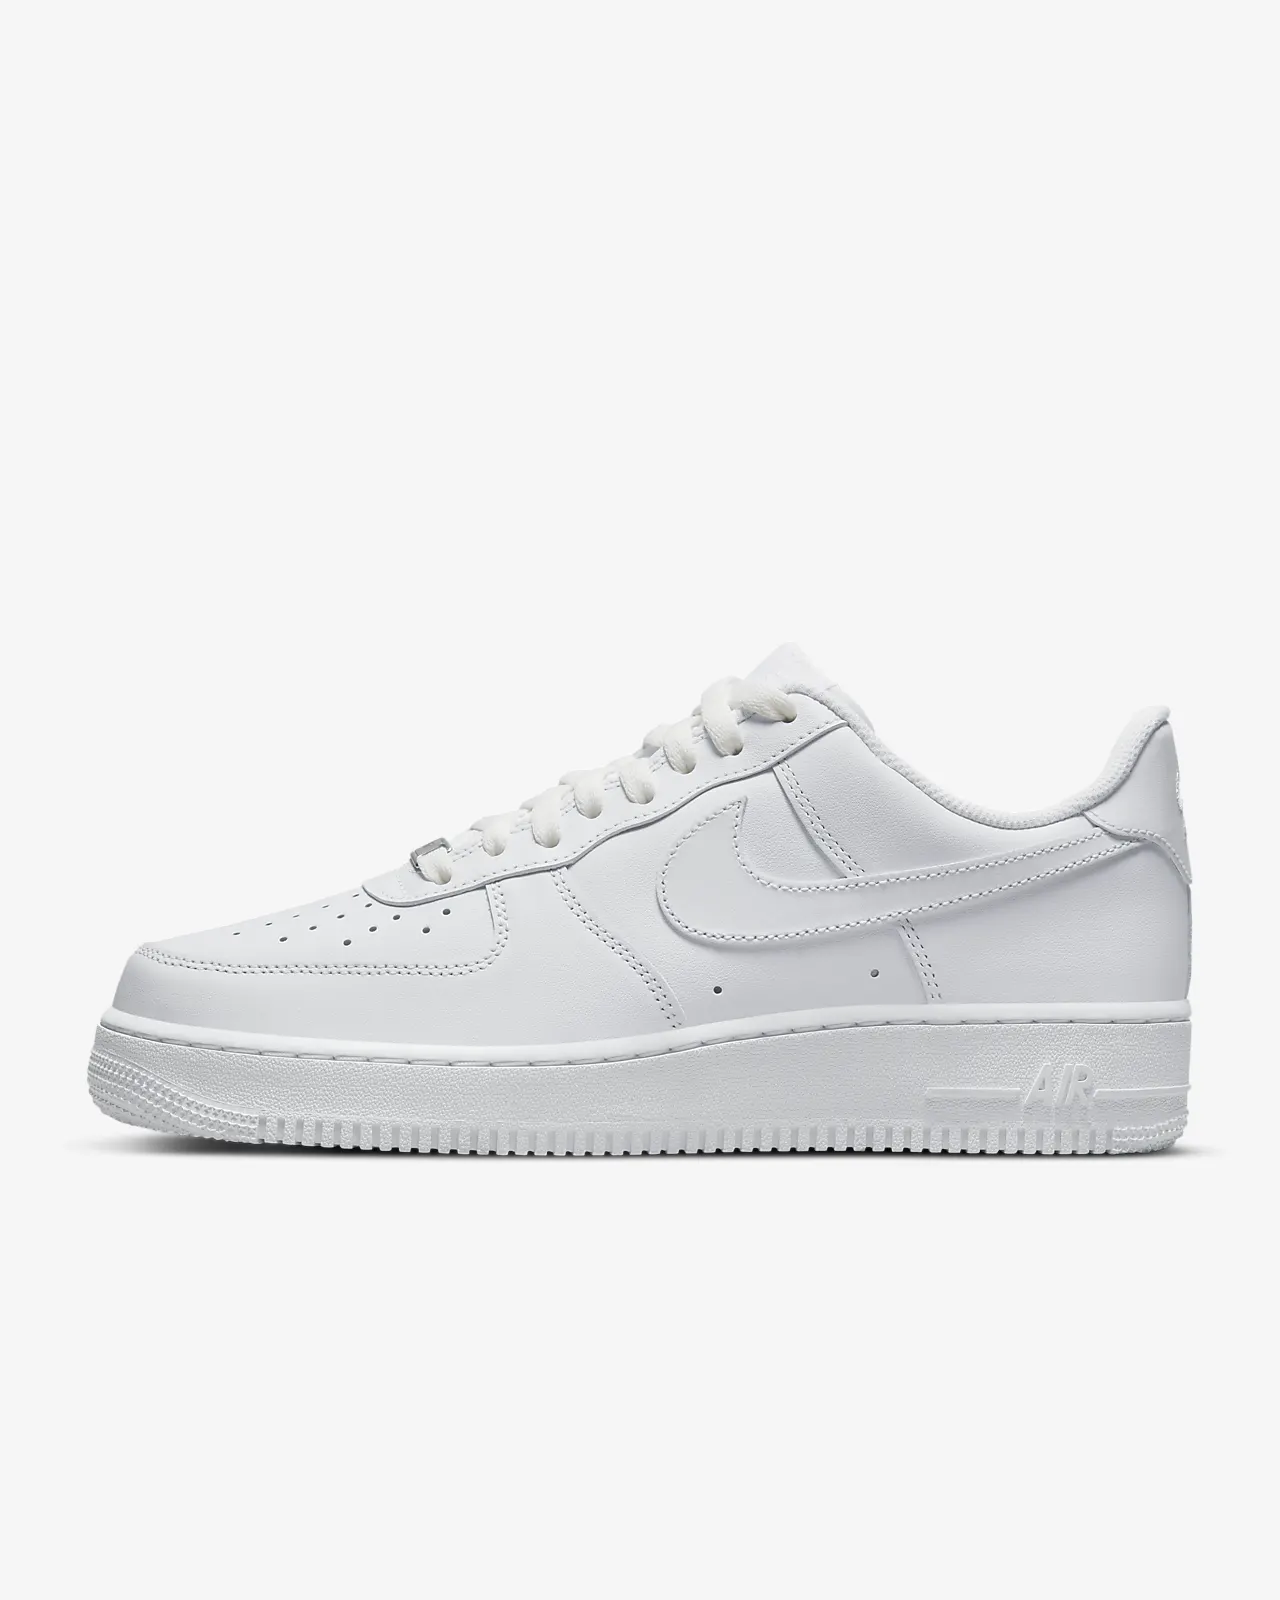 where can i buy air force ones in bulk